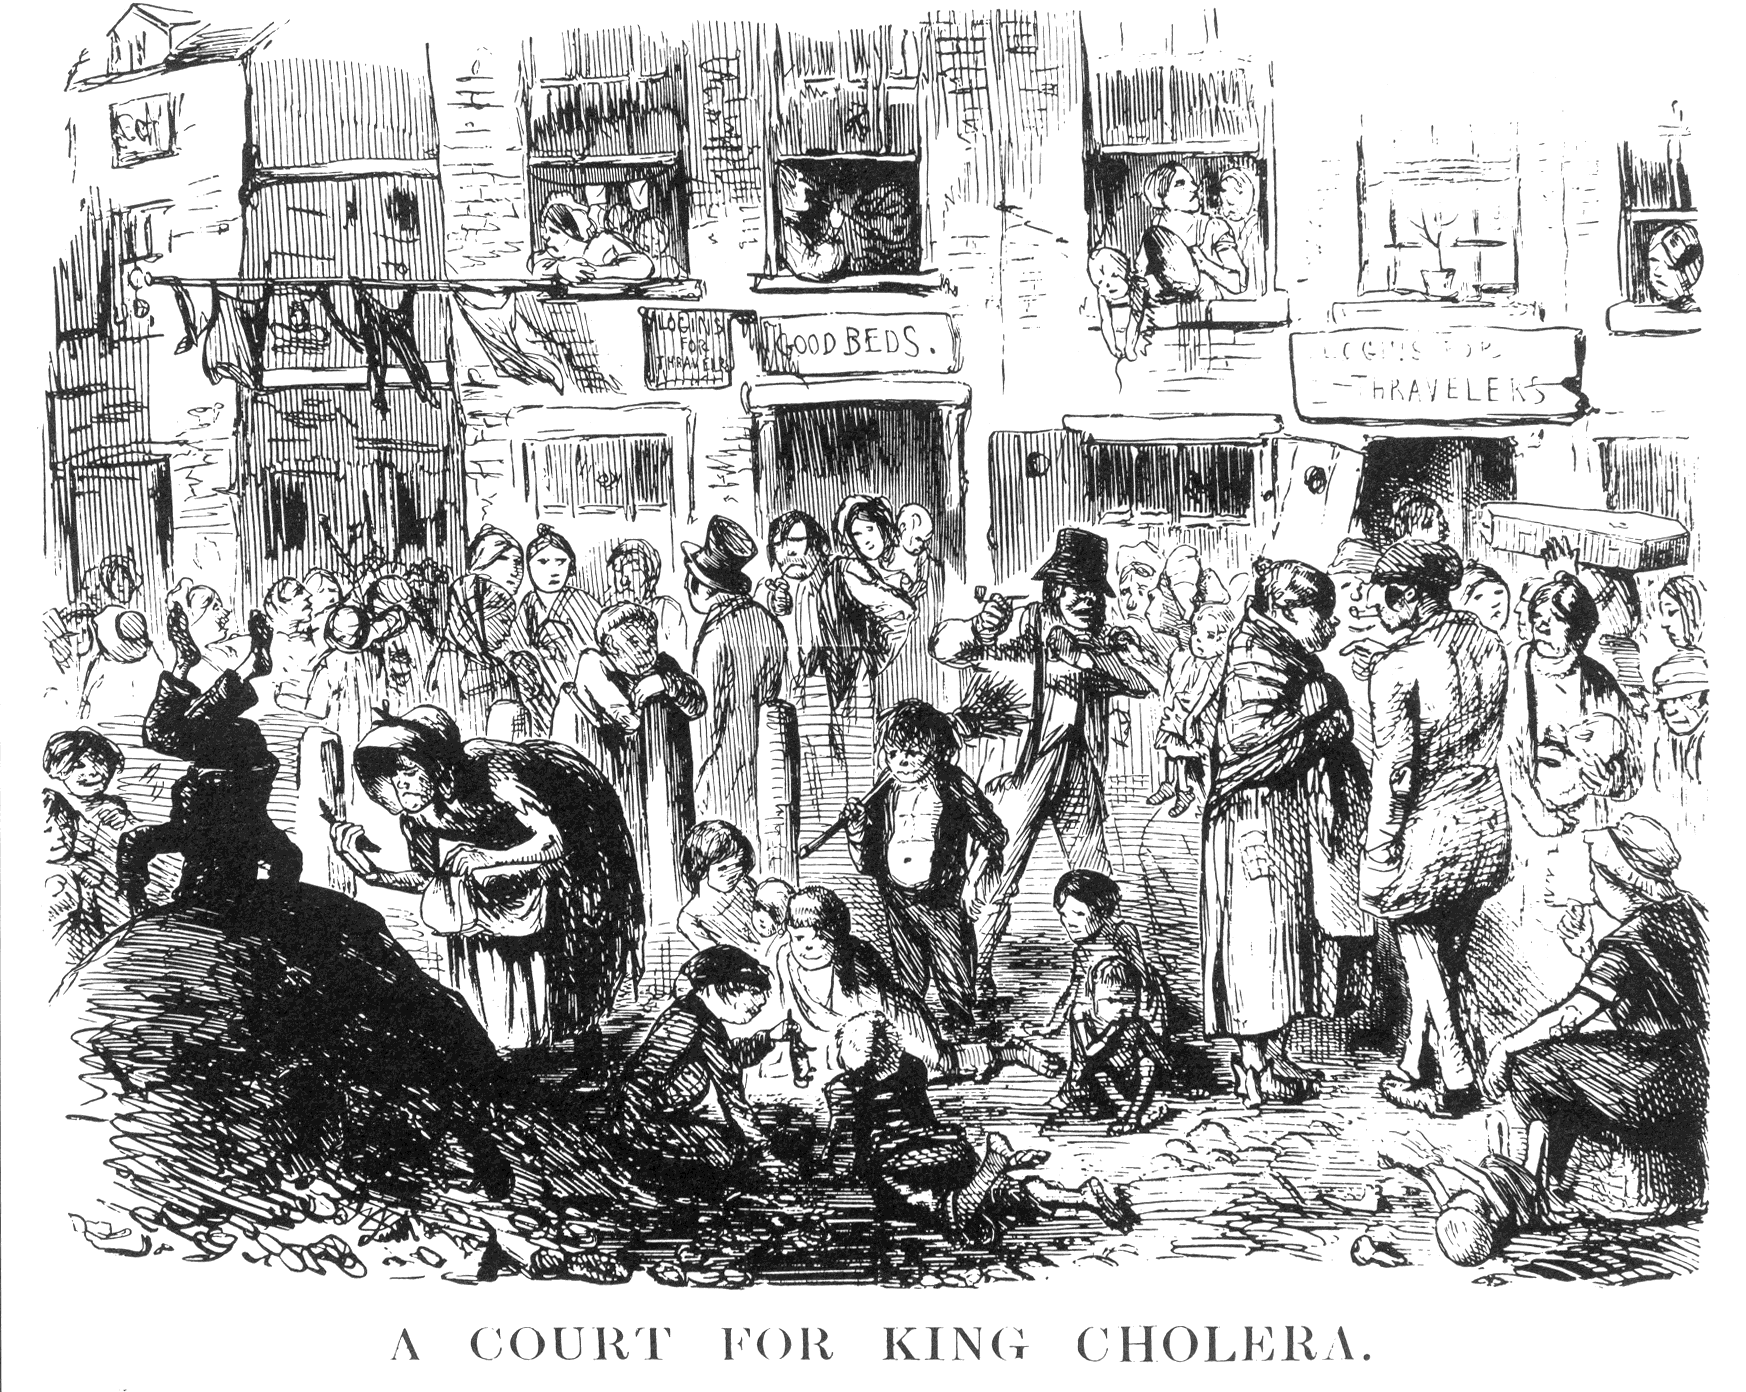 An 1852 illustration from the magazine Punch showing where cholera was thought to spread. The 'Court for King Cholera' was the slums, largely due to overcrowding and poor hygienic conditions.